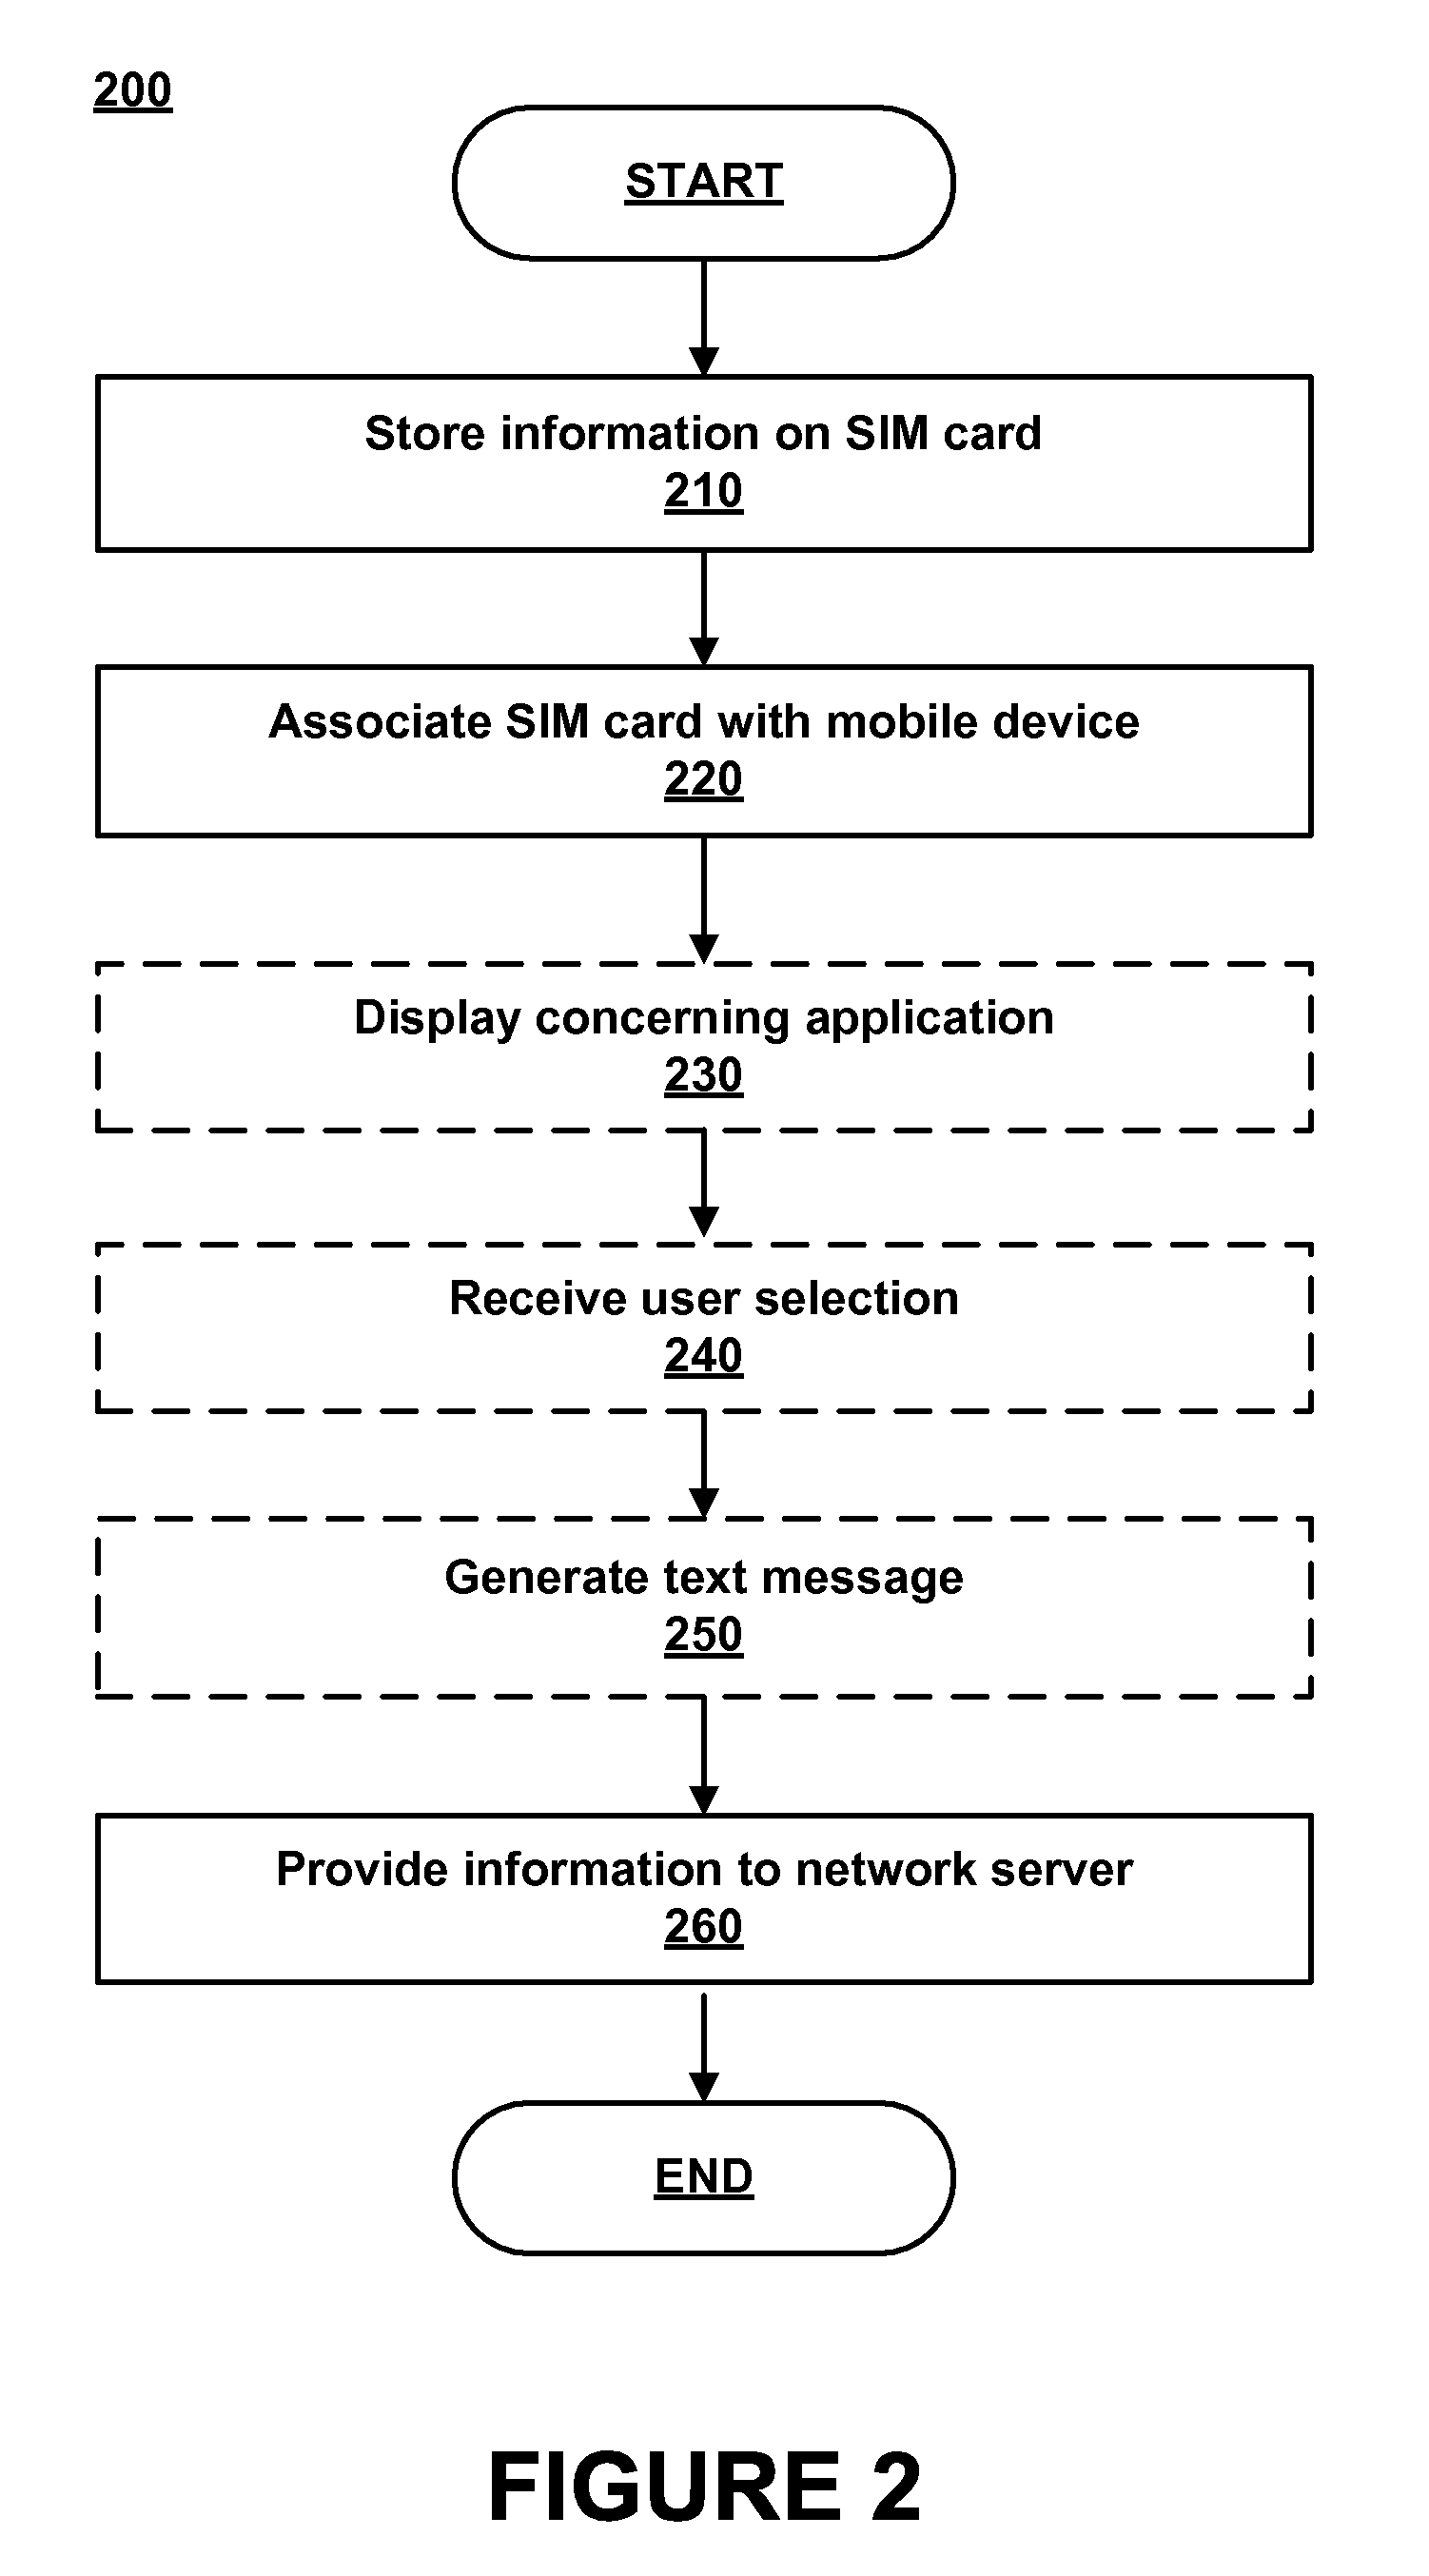 Application discovery on mobile devices